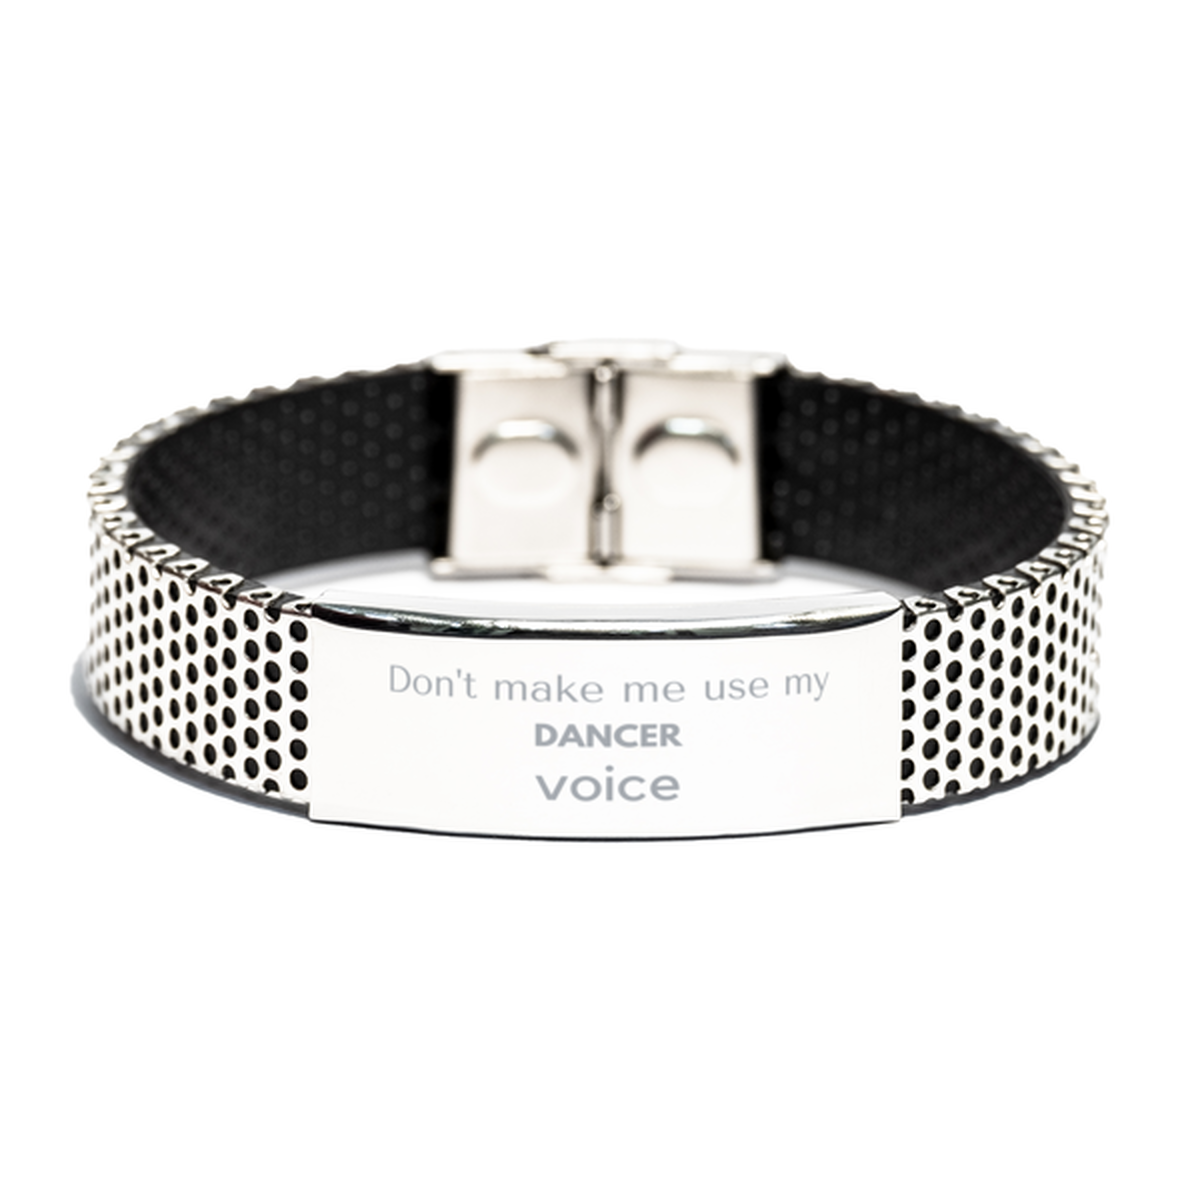 Don't make me use my Dancer voice, Sarcasm Dancer Gifts, Christmas Dancer Stainless Steel Bracelet Birthday Unique Gifts For Dancer Coworkers, Men, Women, Colleague, Friends